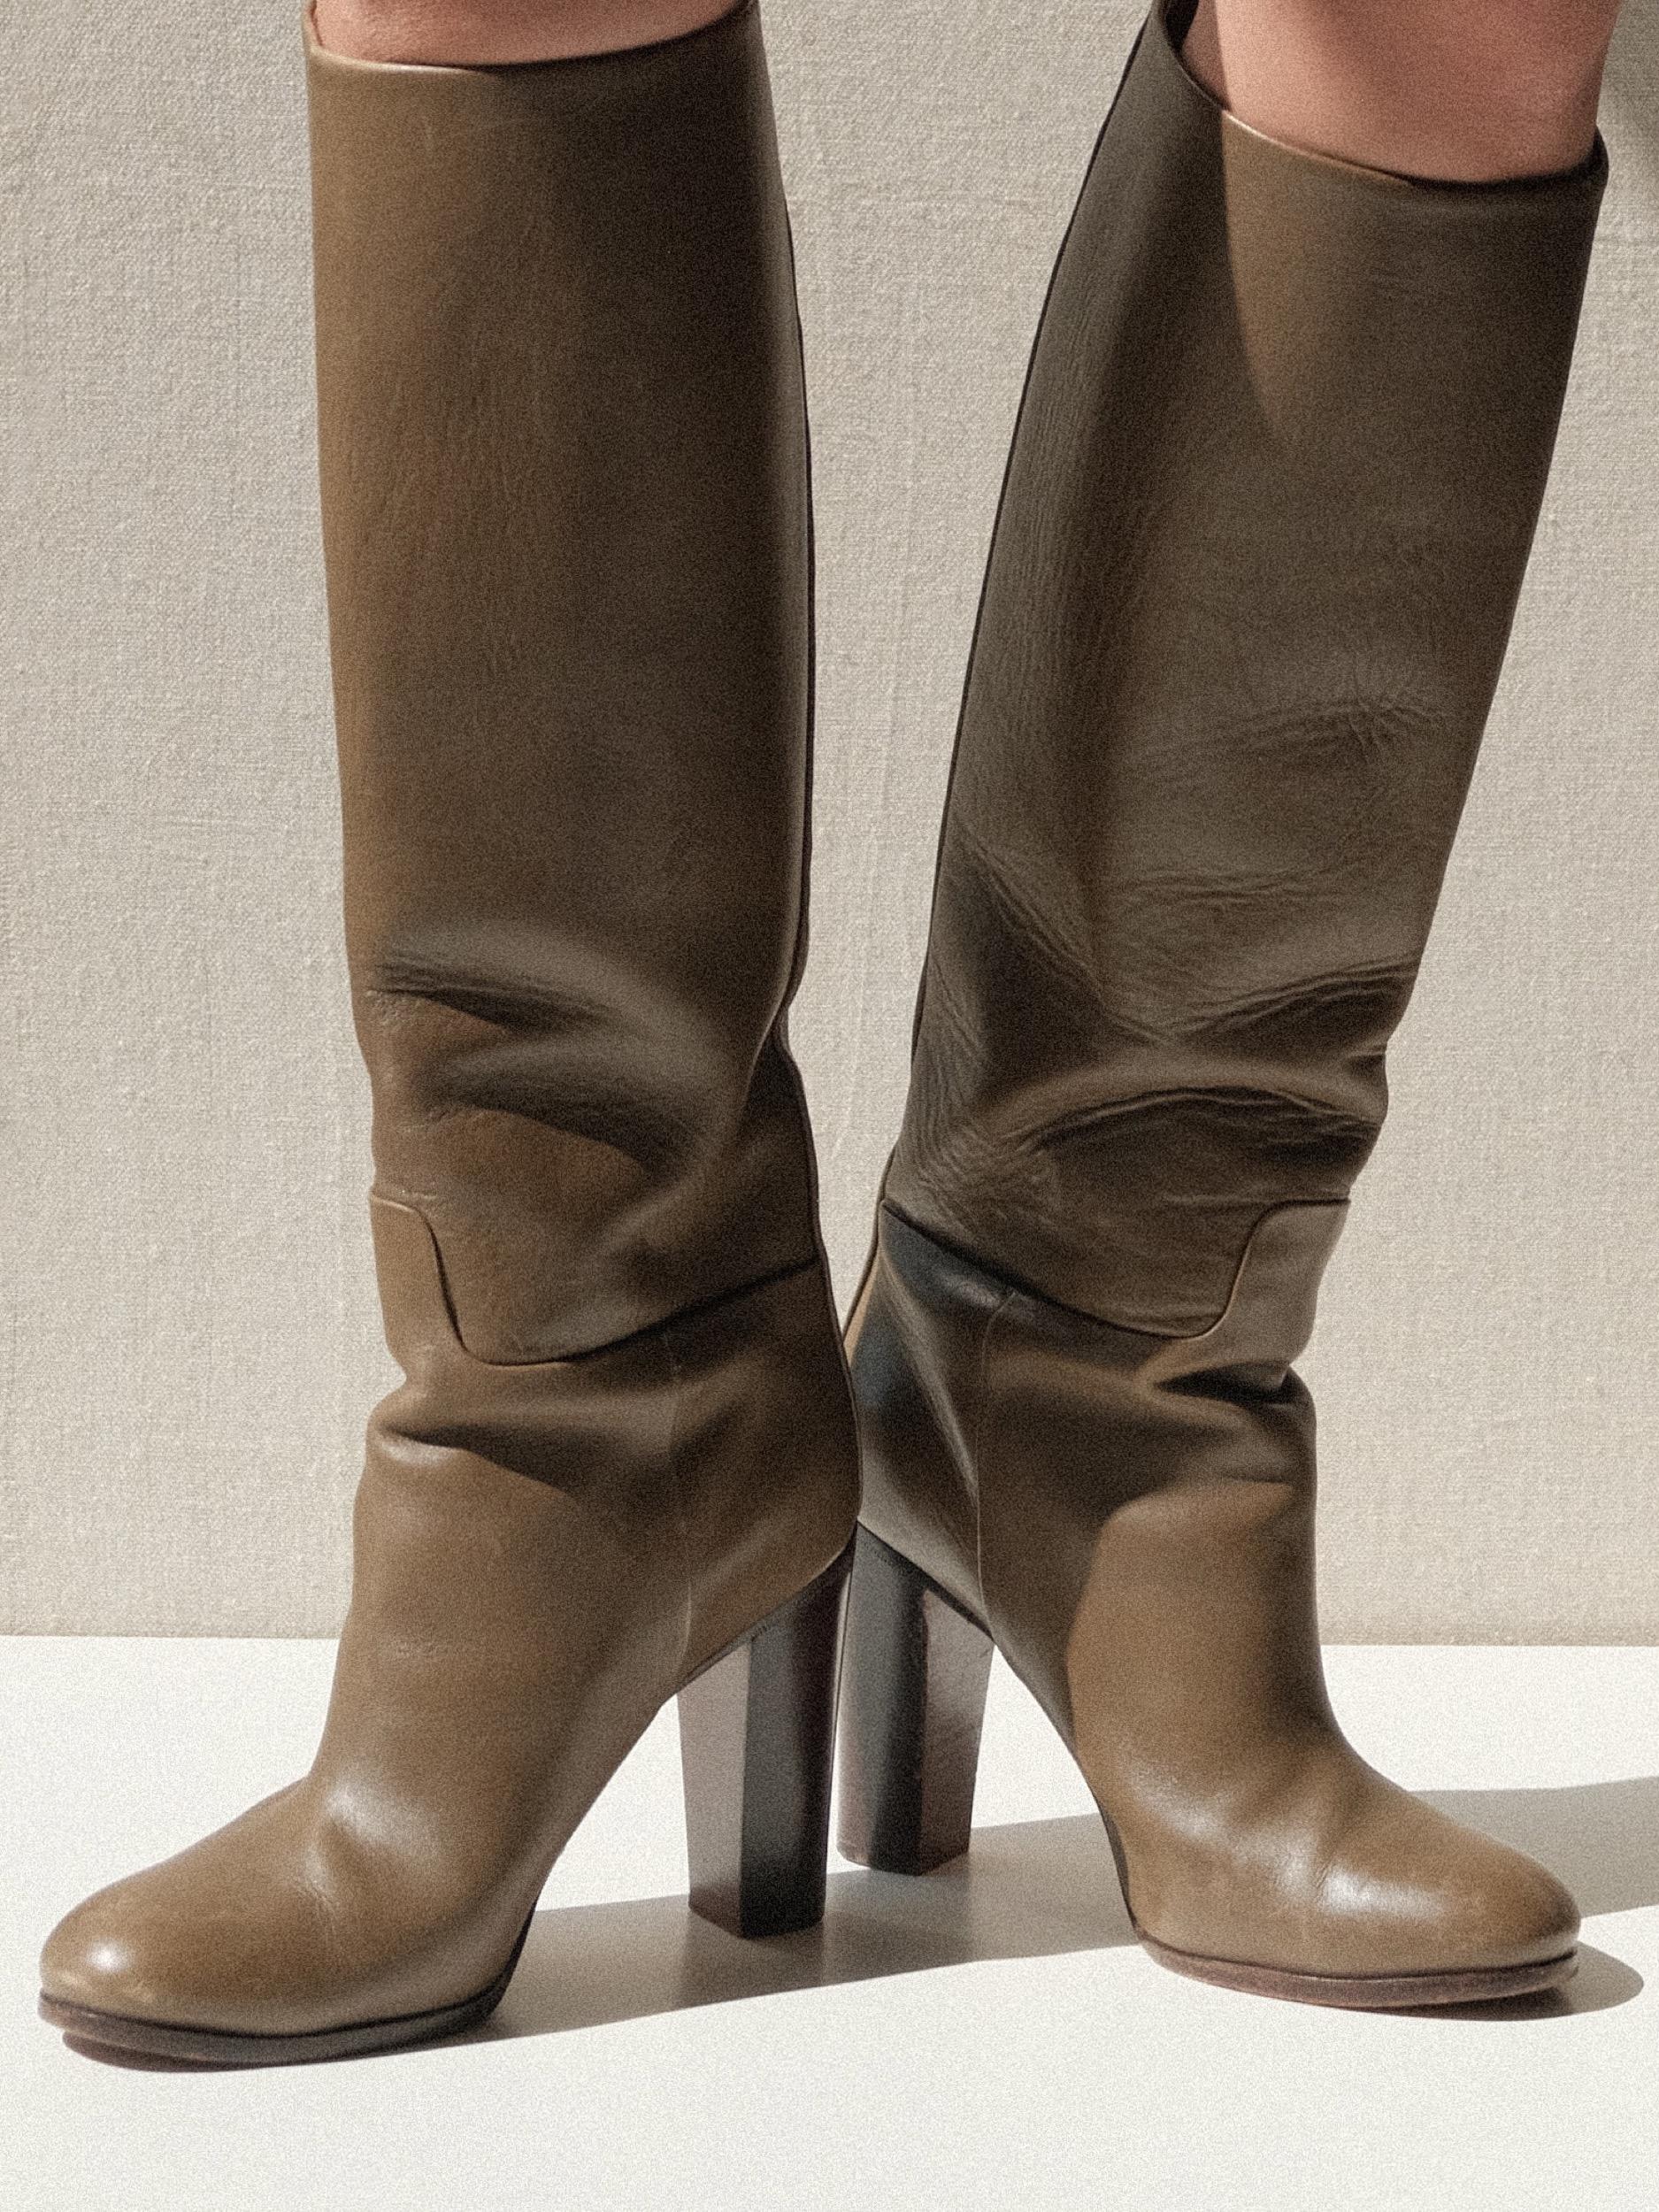 Green Leather Céline Phoebe Philo Knee High Boots 38 For Sale 8